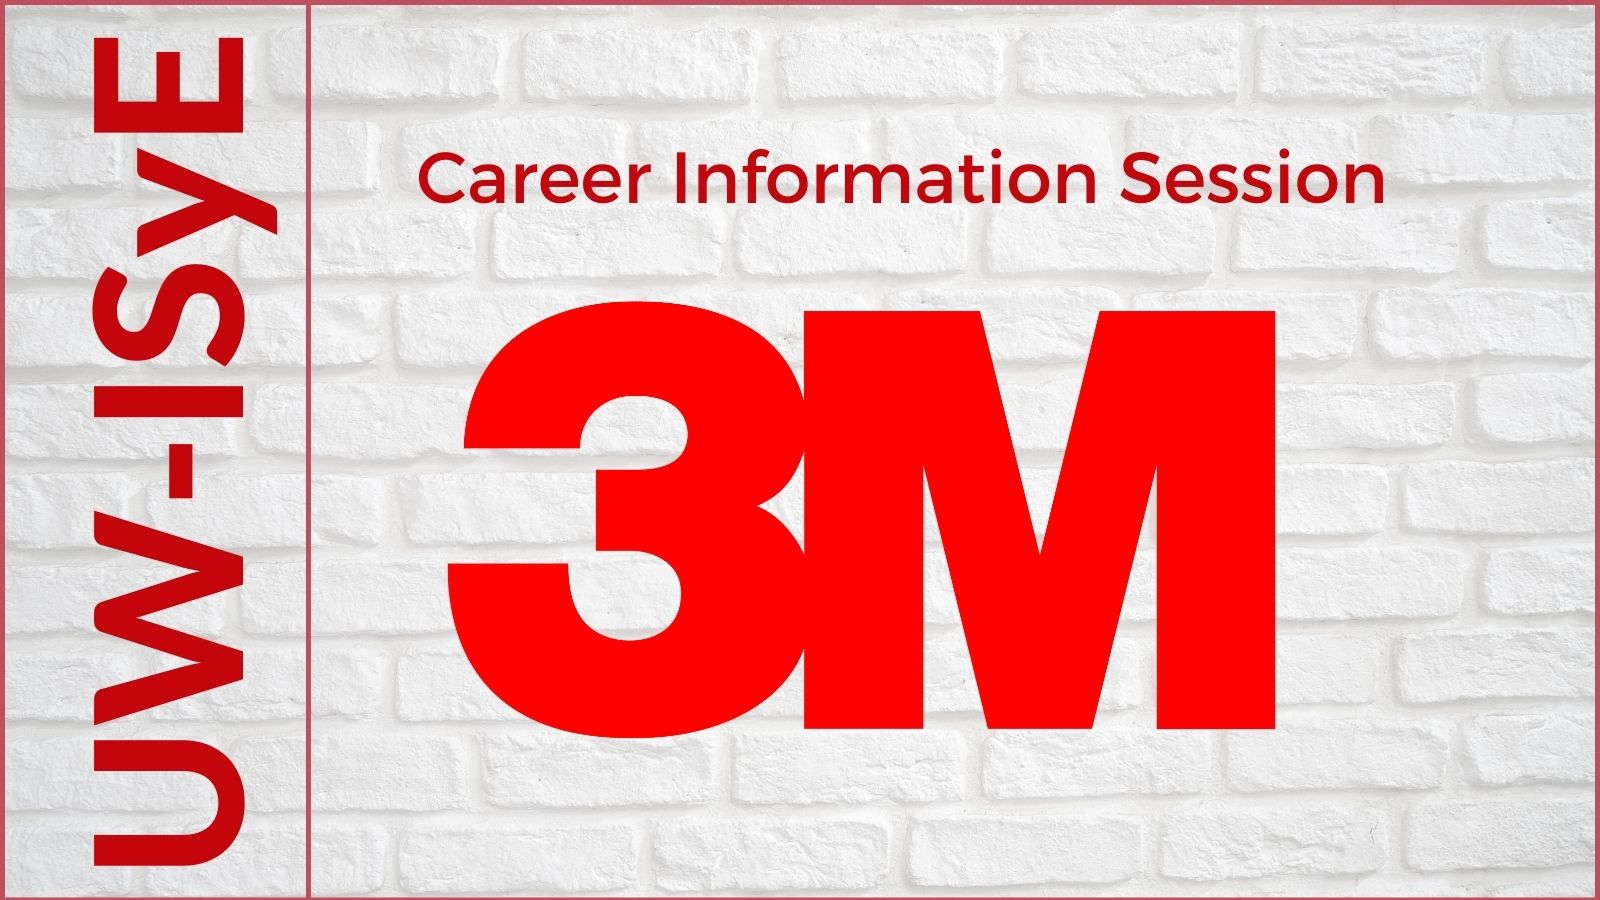 UW-ISyE career information session with 3M